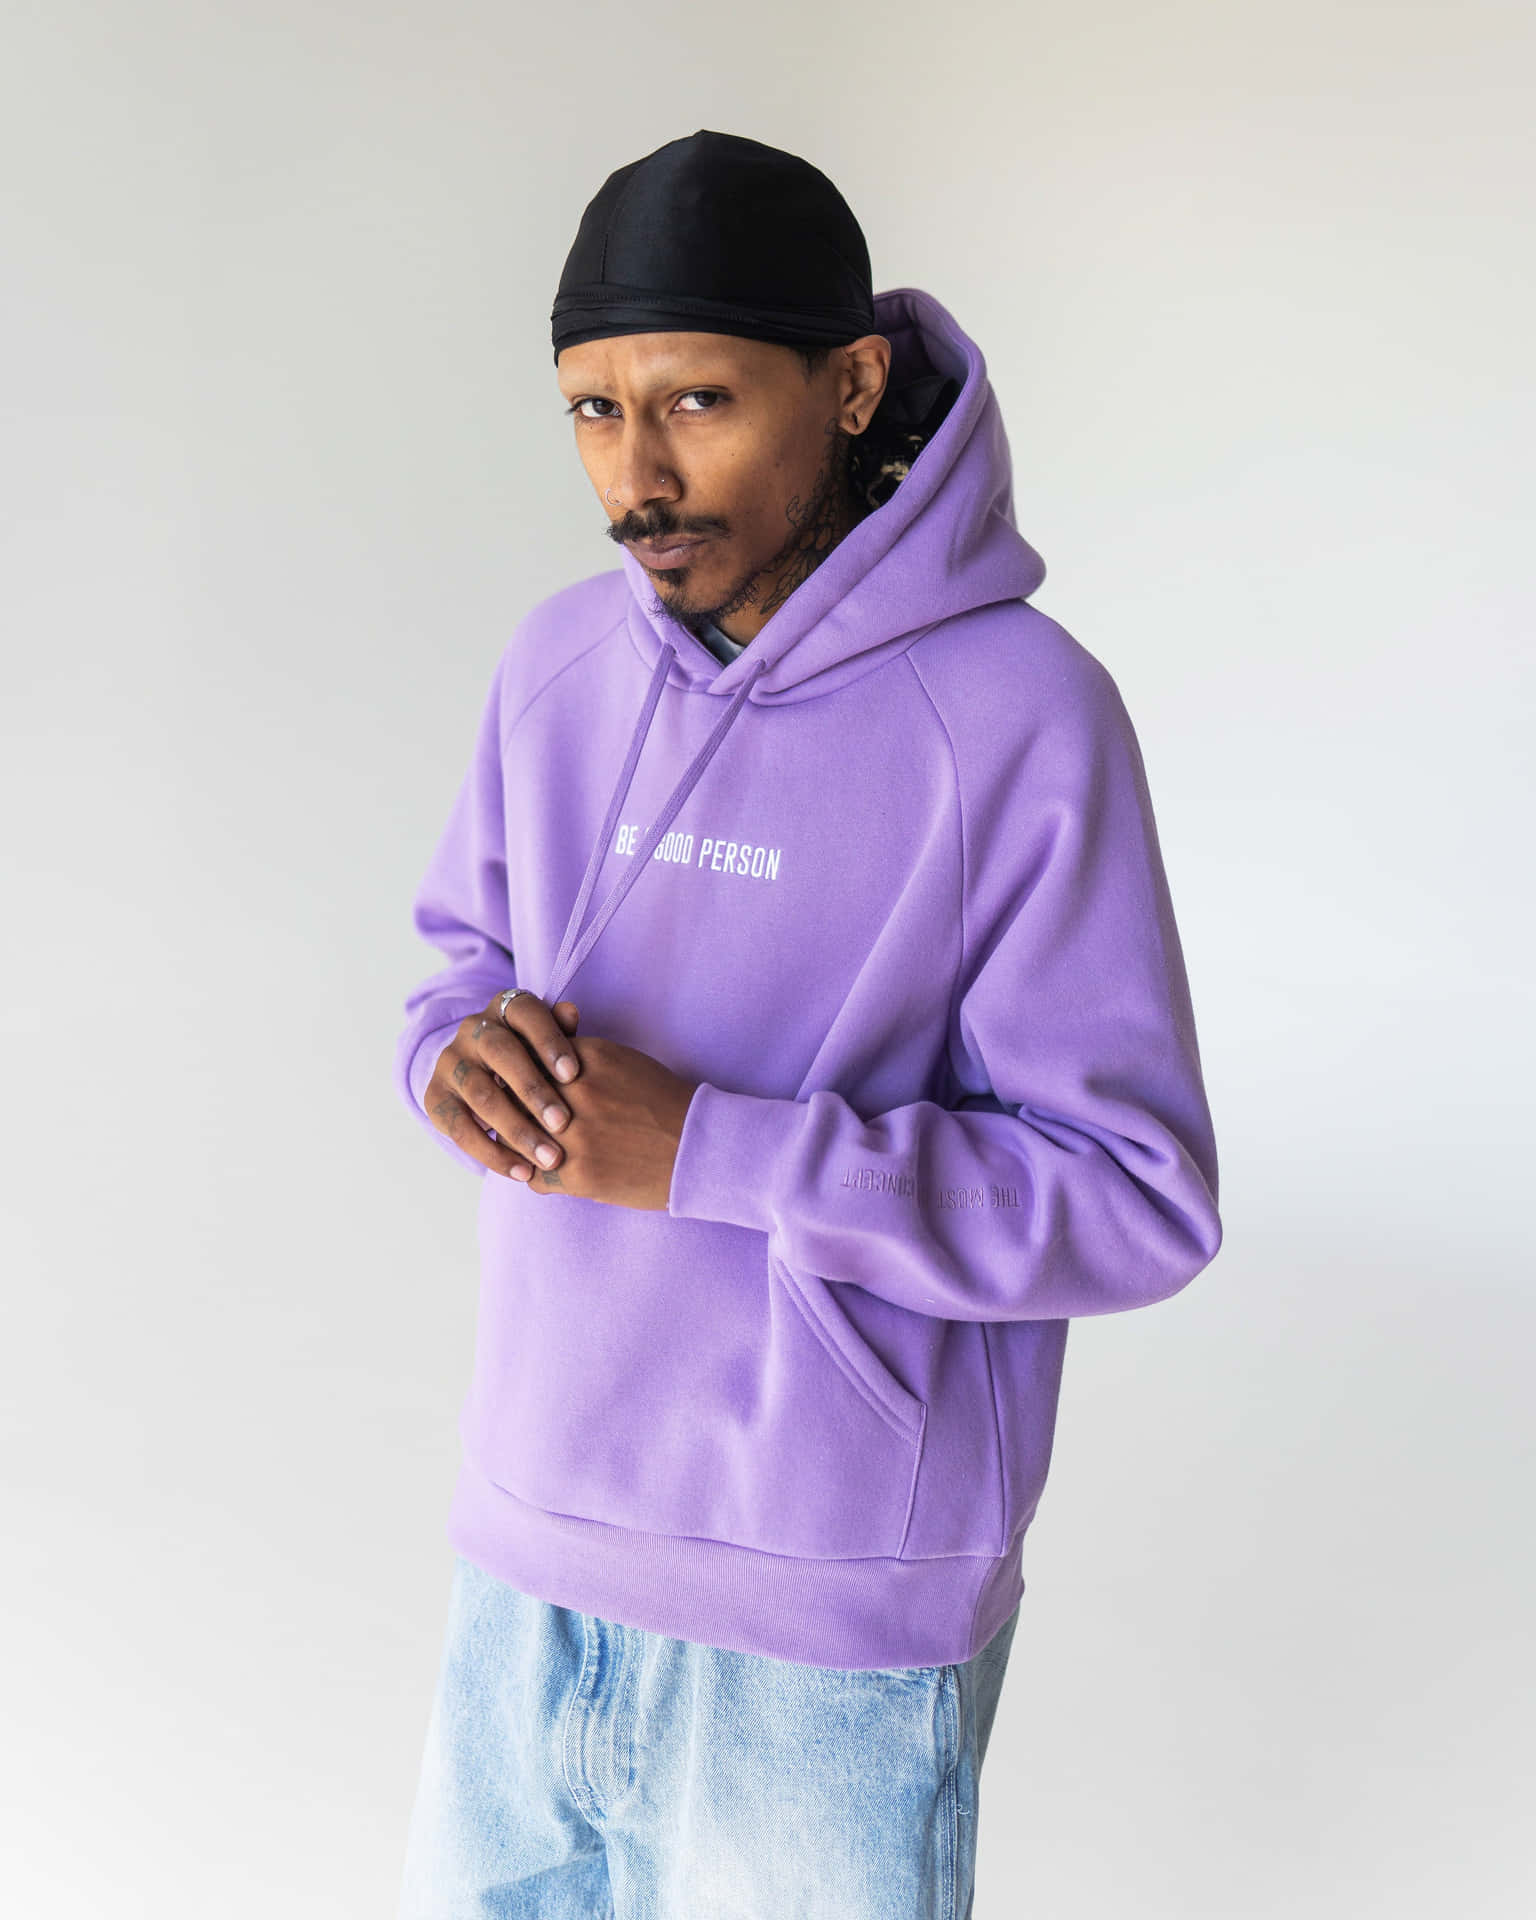 Add a hint of cool to your look with this stylish purple sweatshirt. Wallpaper